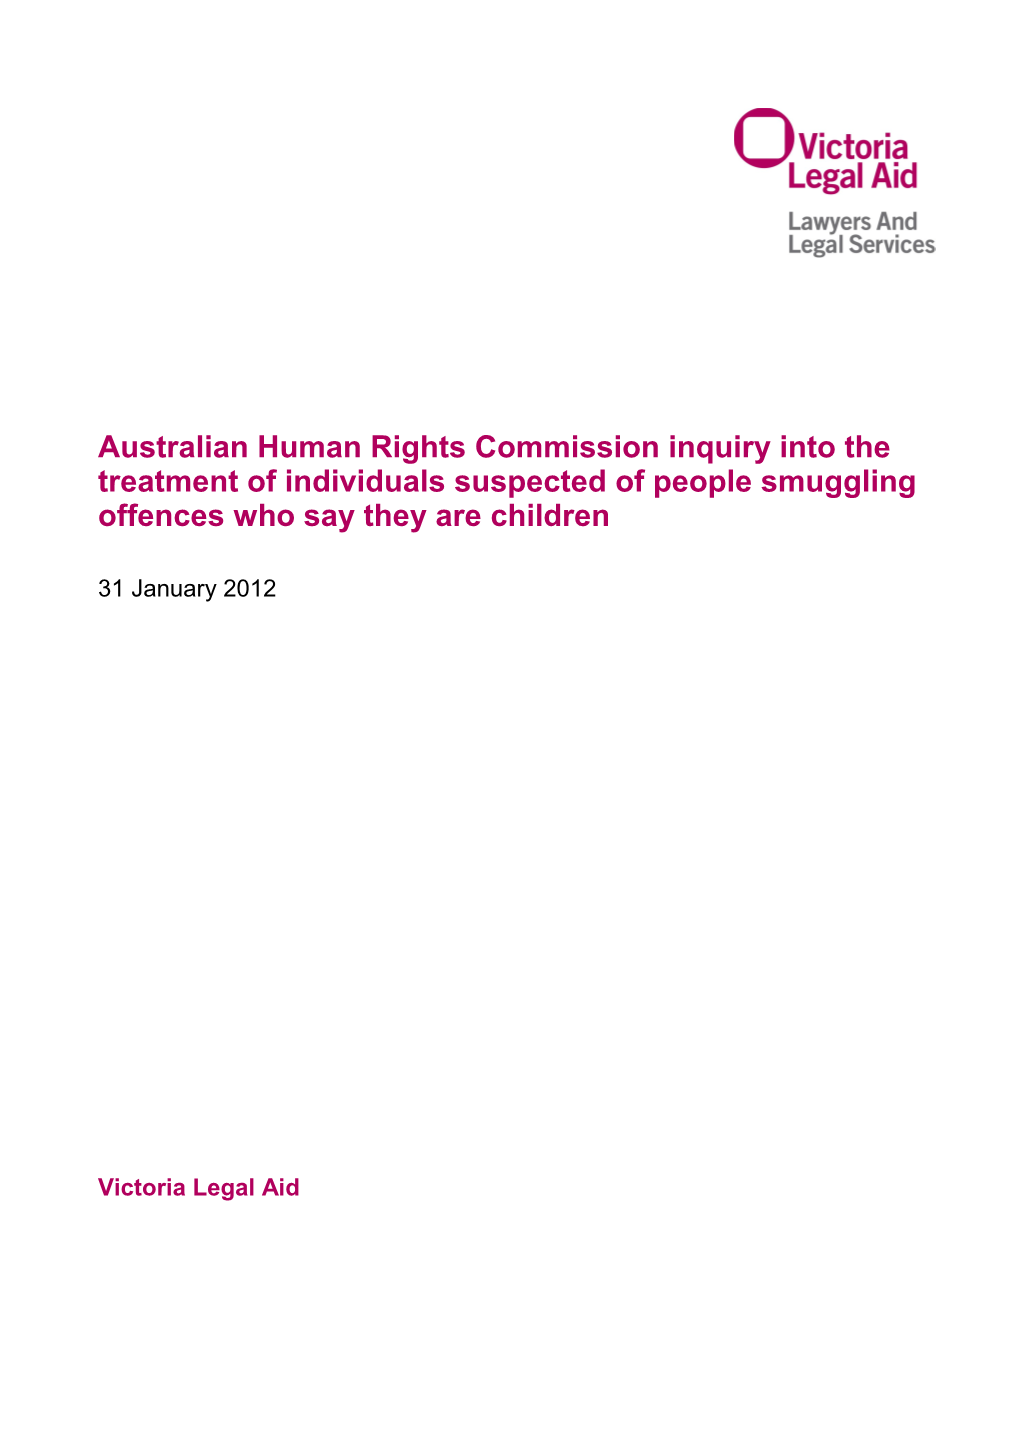 Australian Human Rights Commission Inquiry Into the Treatment of Individuals Suspected